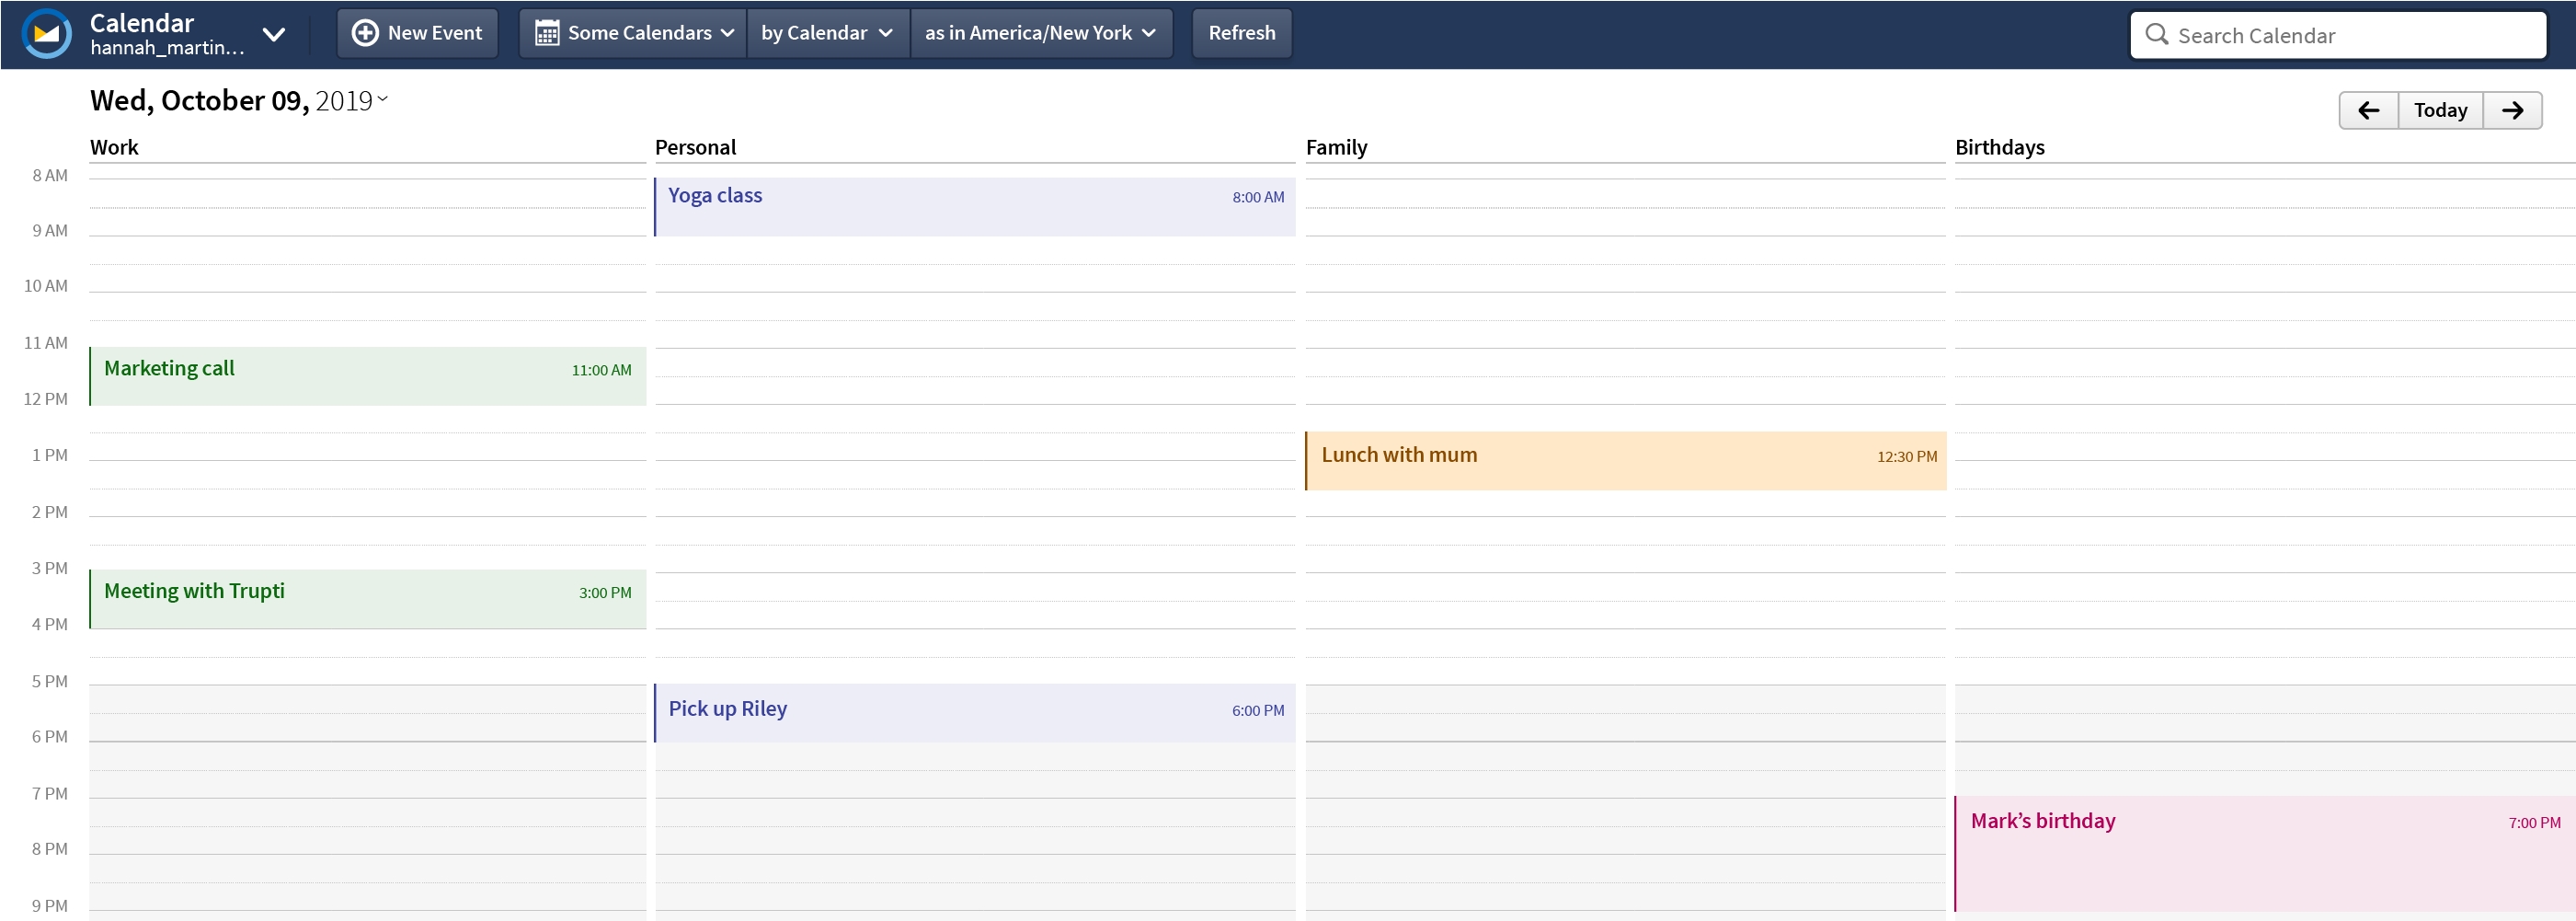 Find A Good Time To Get Things Done With Side-By-Side Calendars  Calendar With Time